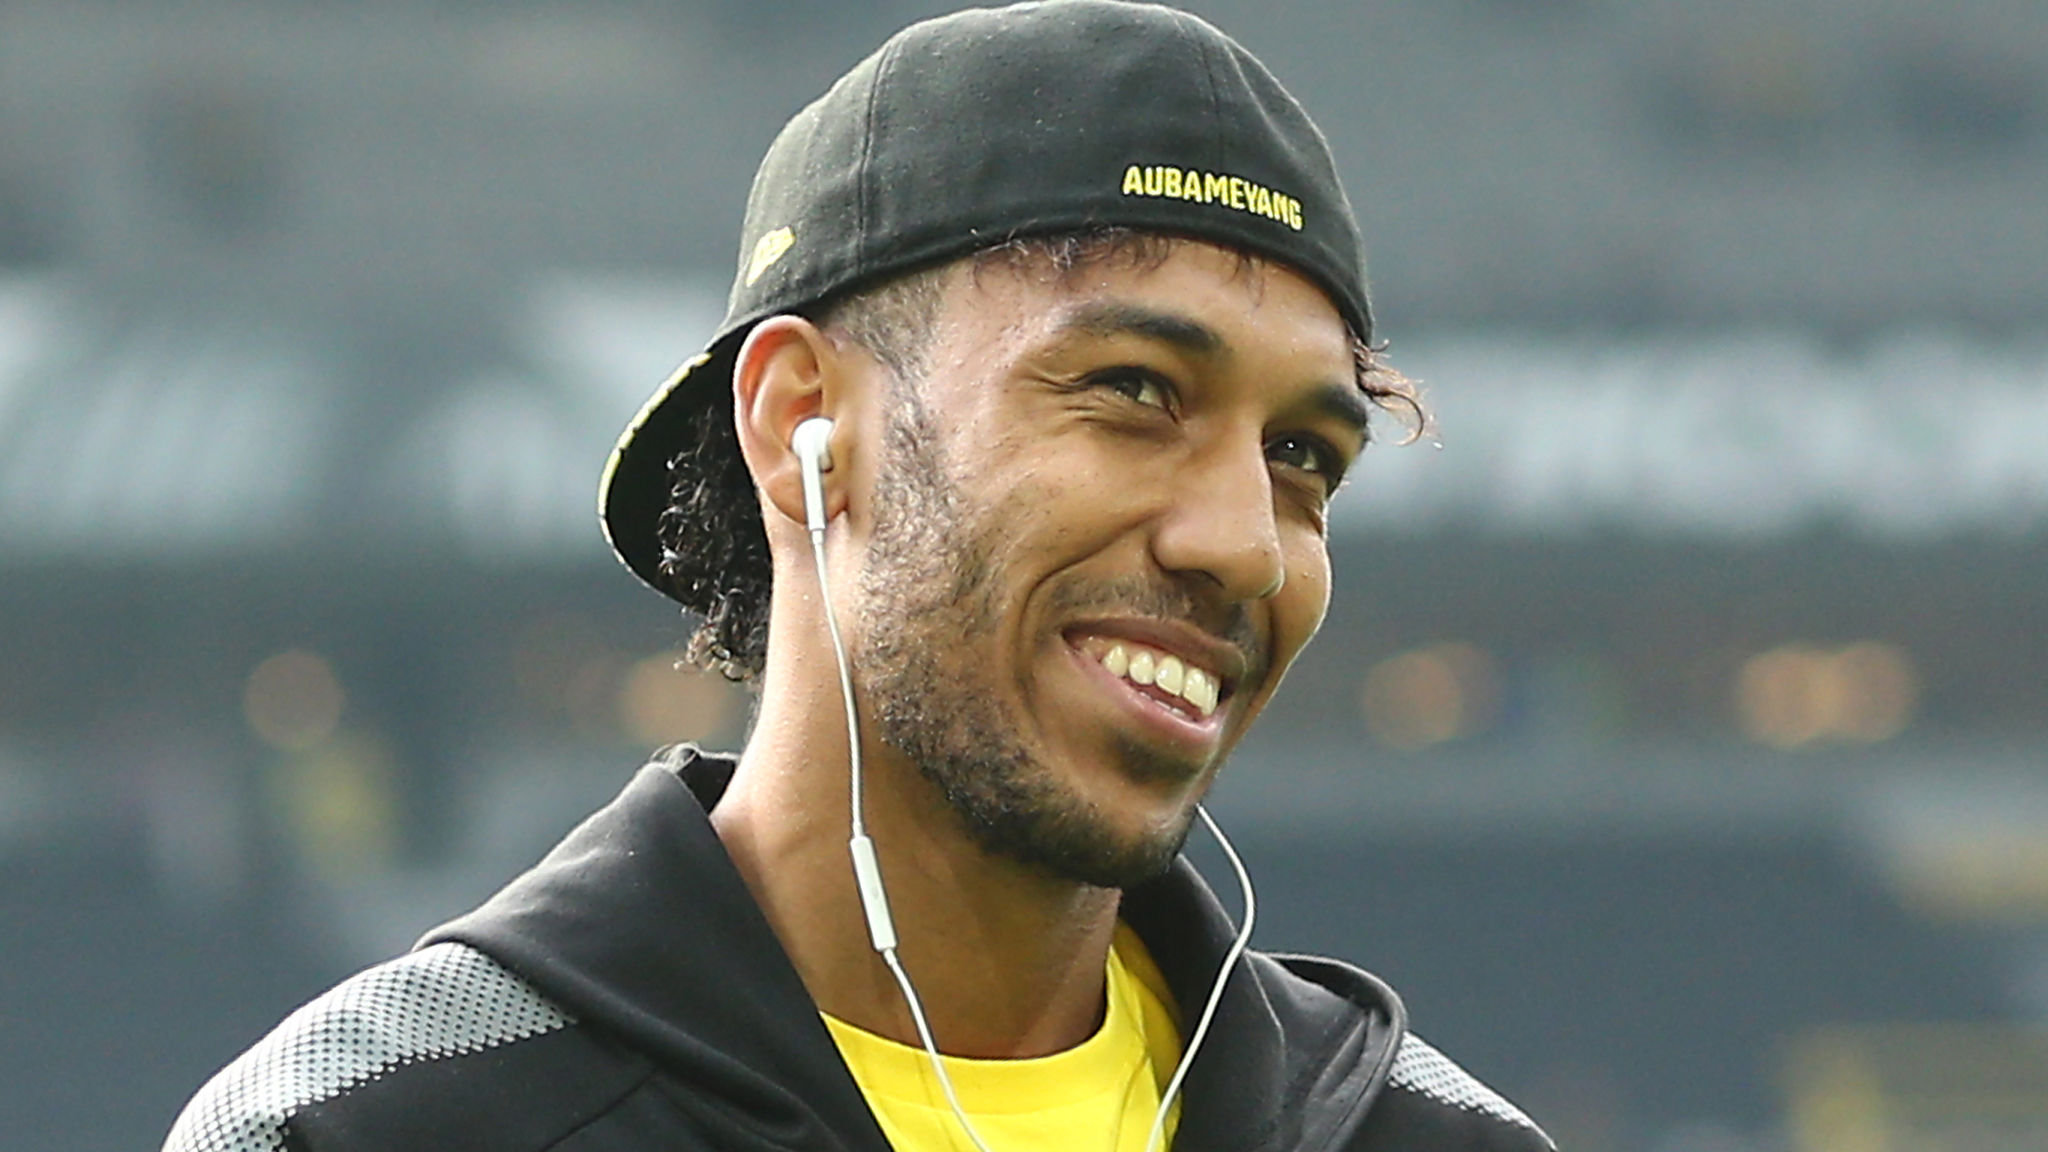 Aubameyang In Normal Clothes , HD Wallpaper & Backgrounds